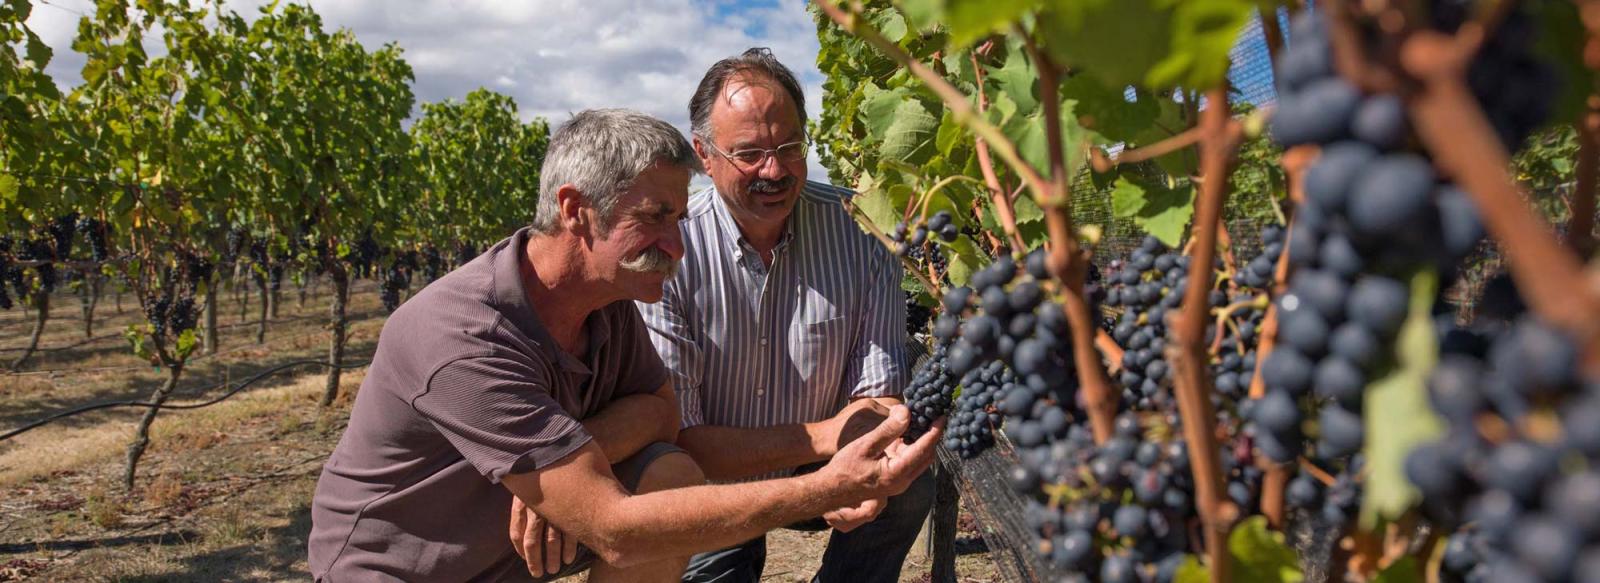 A winemaker from Hawkesbay is checking his grapes to see if they are ripe.